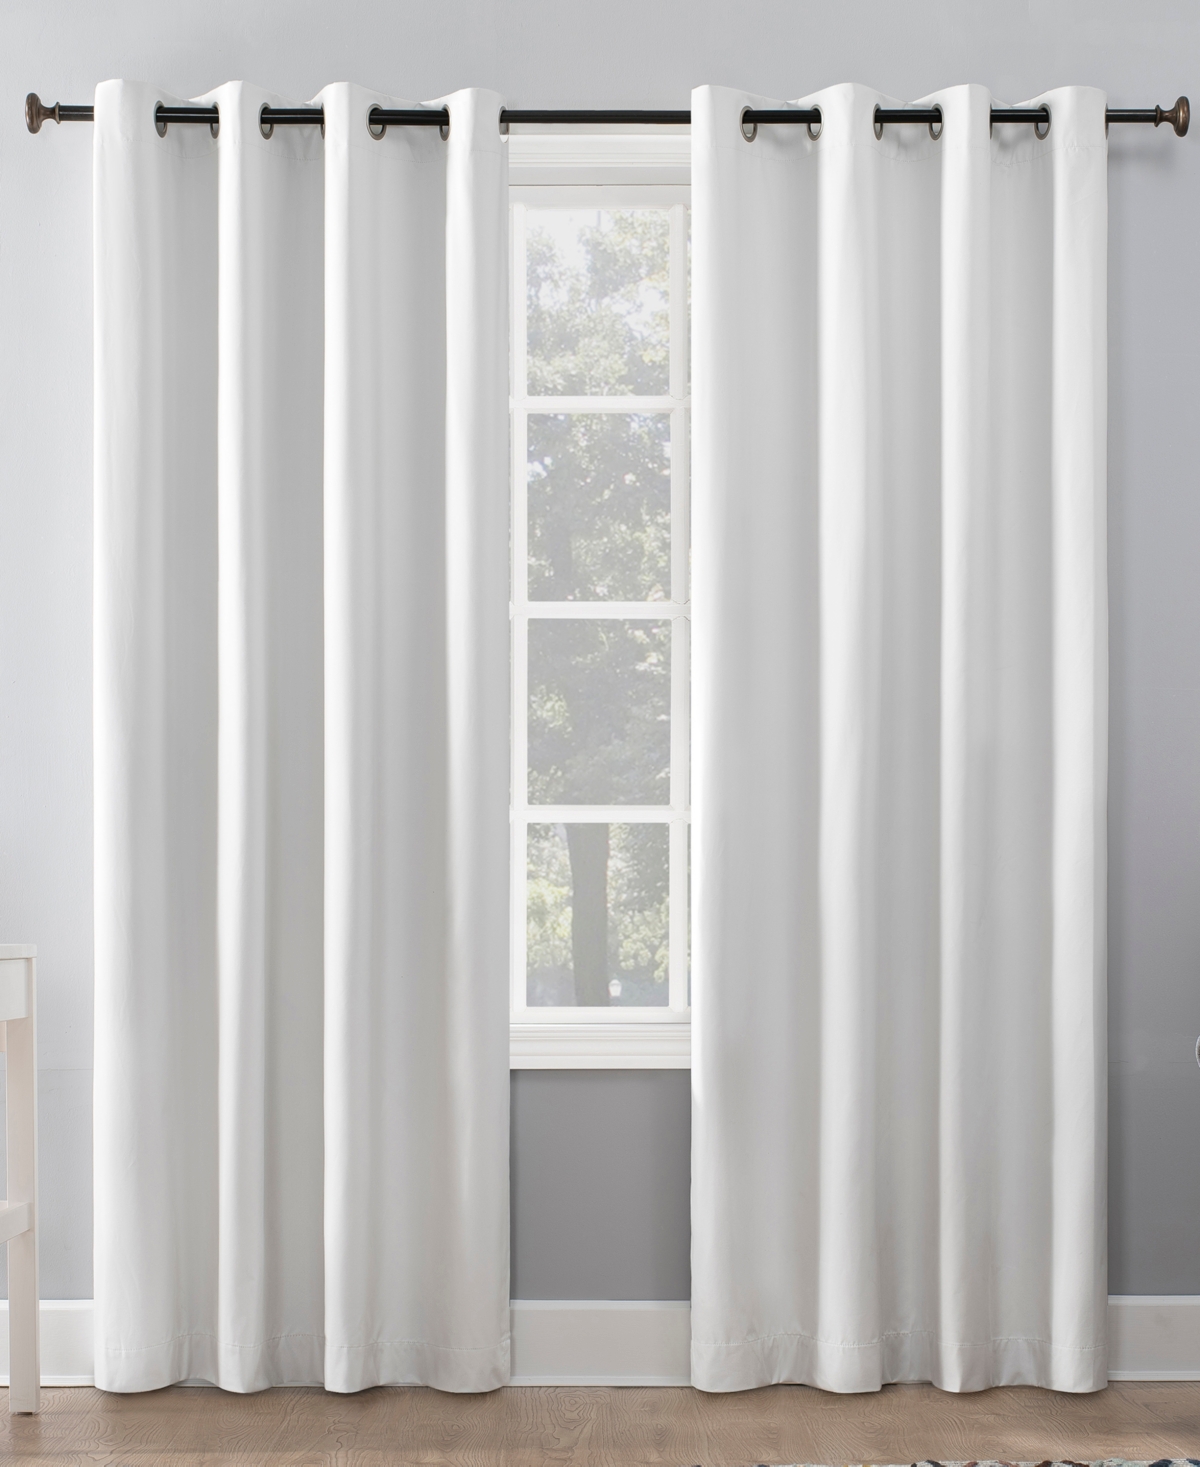 Sun Zero Duran Thermal Insulated Blackout Grommet Curtain Panel, 108" L X 50" W In Winter White